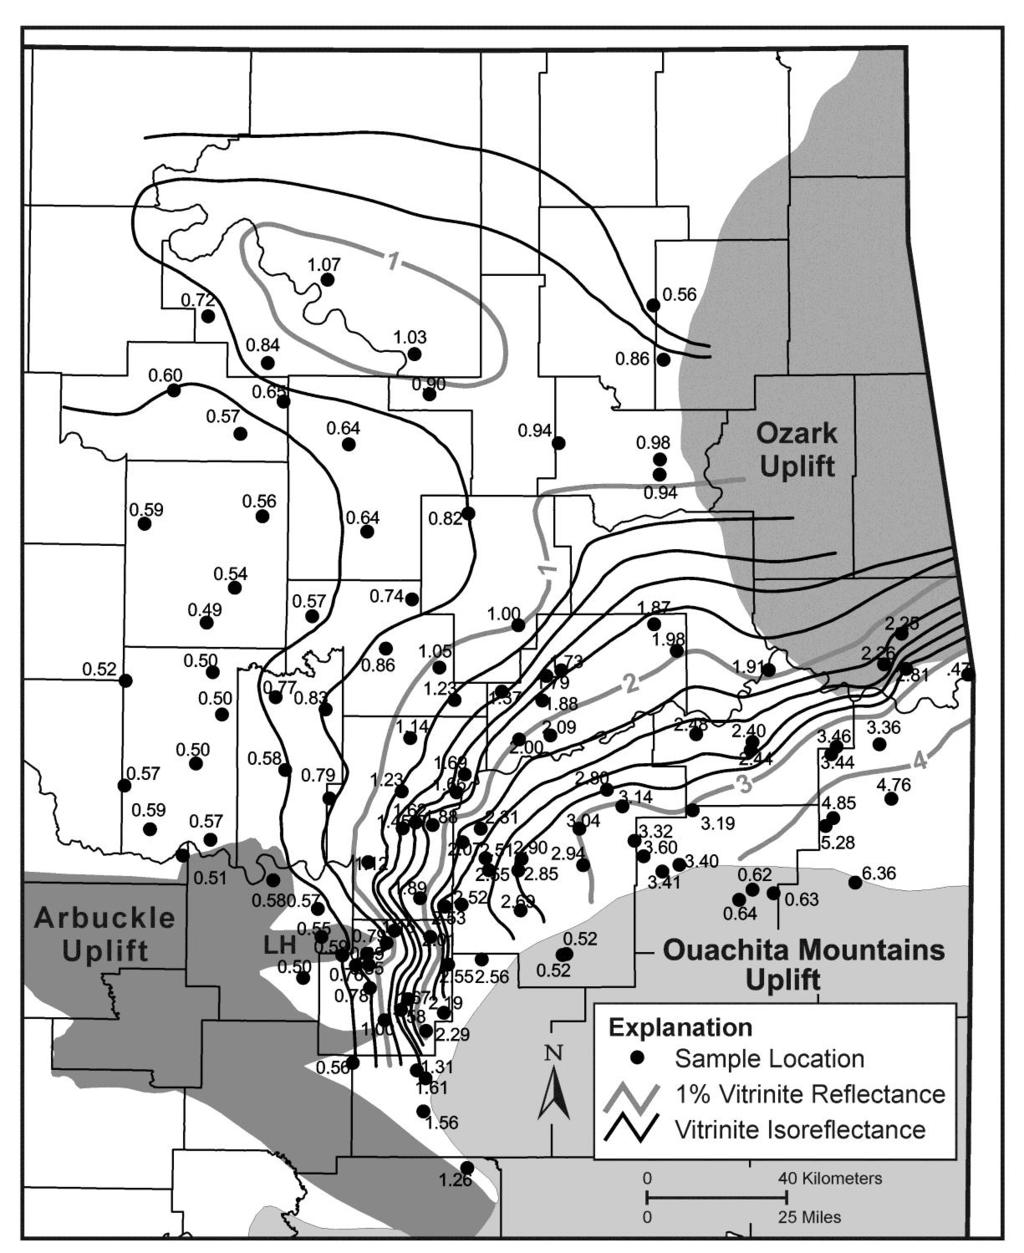 Isoreflectance Map of the Woodford Shale in Eastern Oklahoma (Updated November 2011) 0.77% 1.06% Thermal Anomaly 0.